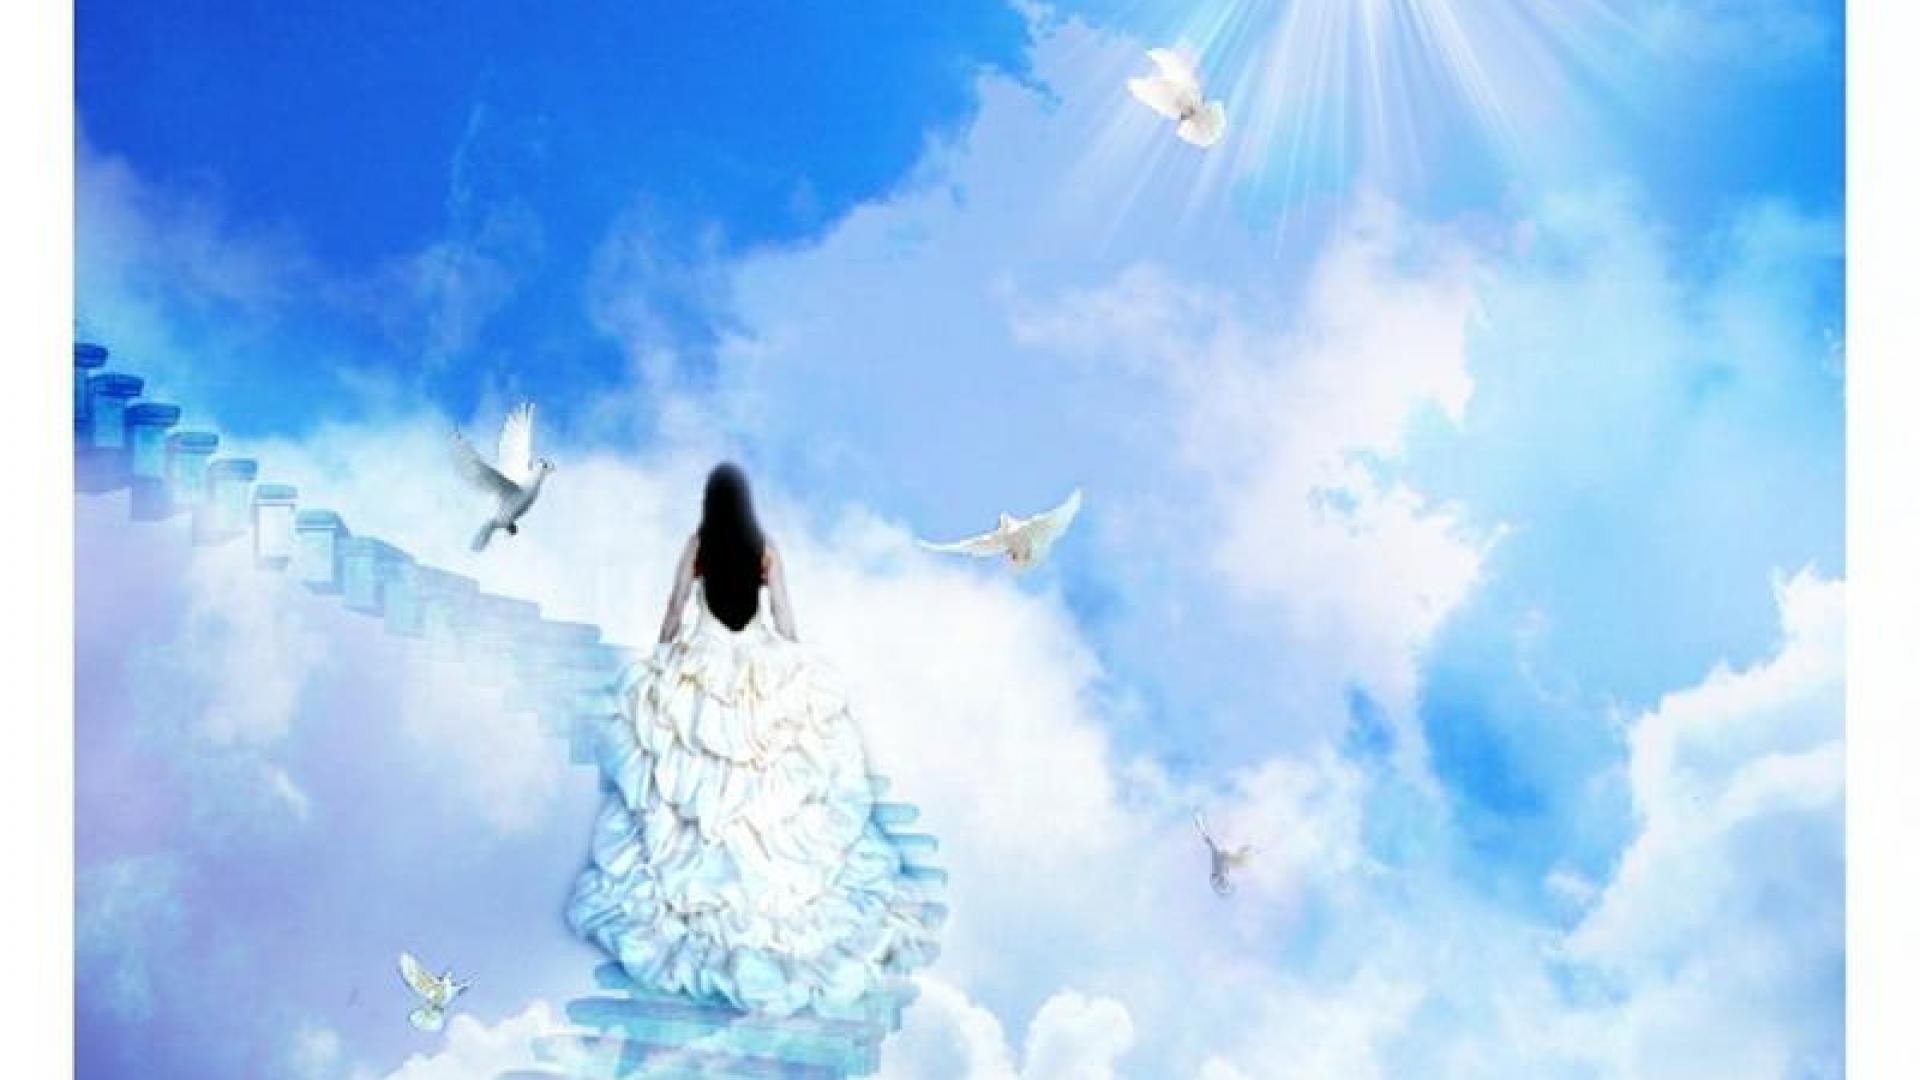 Heaven wallpaper ·① Download free cool HD backgrounds for ...